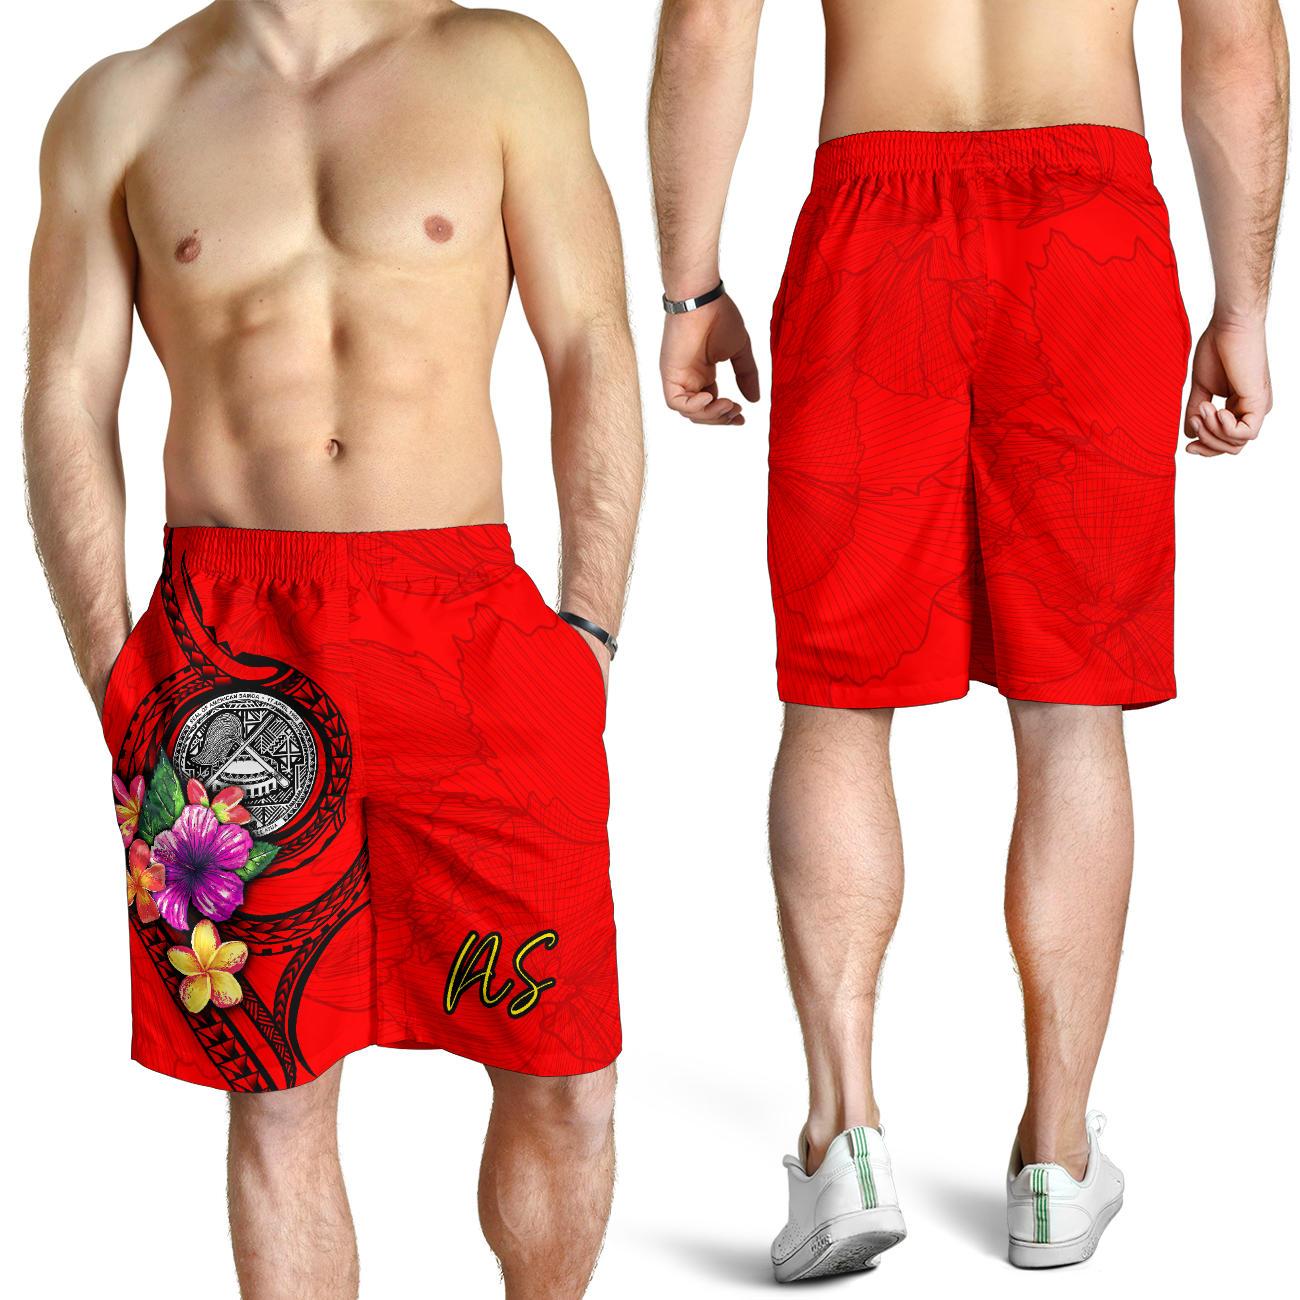 American Samoa Polynesian Men's Shorts - Floral With Seal Red Red - Polynesian Pride